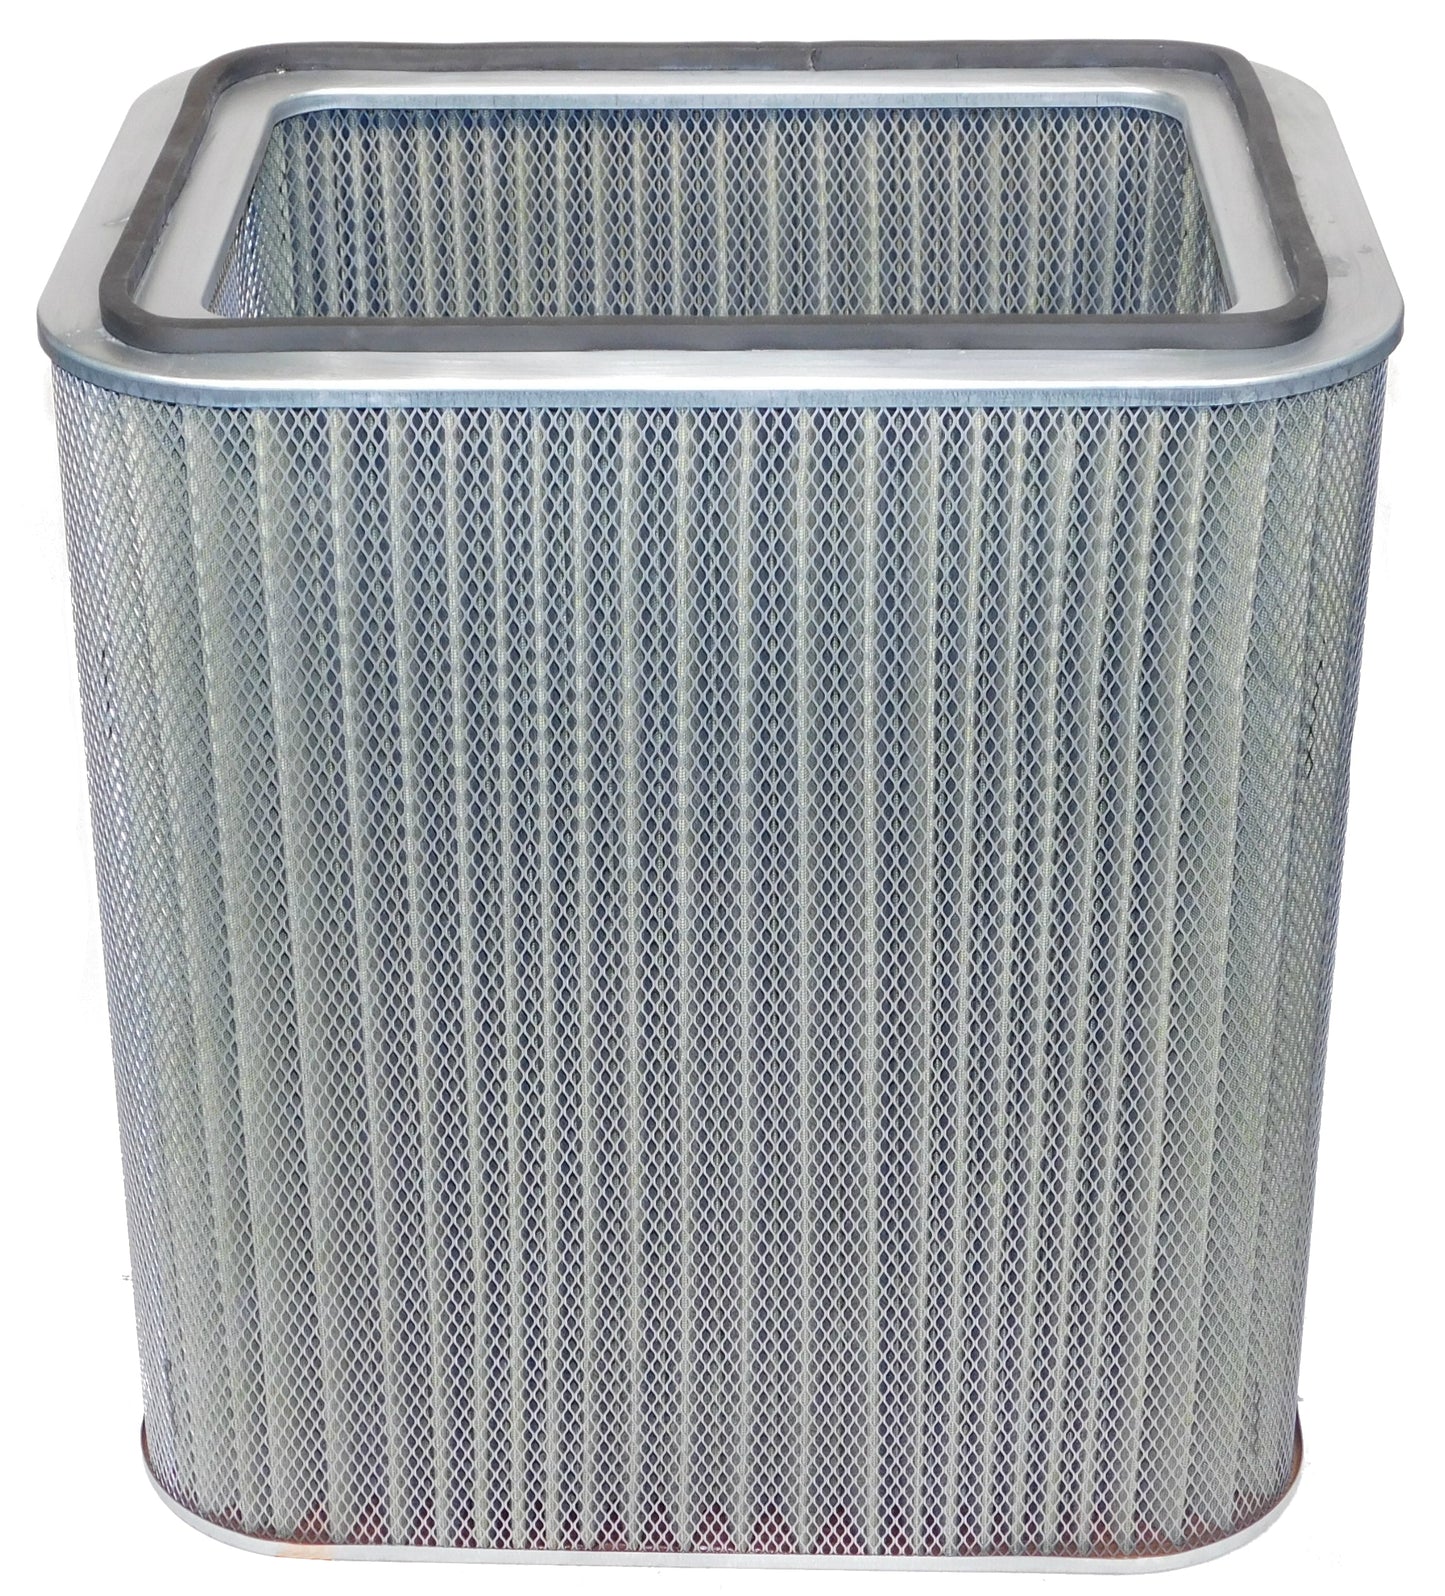 p031776-016-002 - Replacement for Torit filter